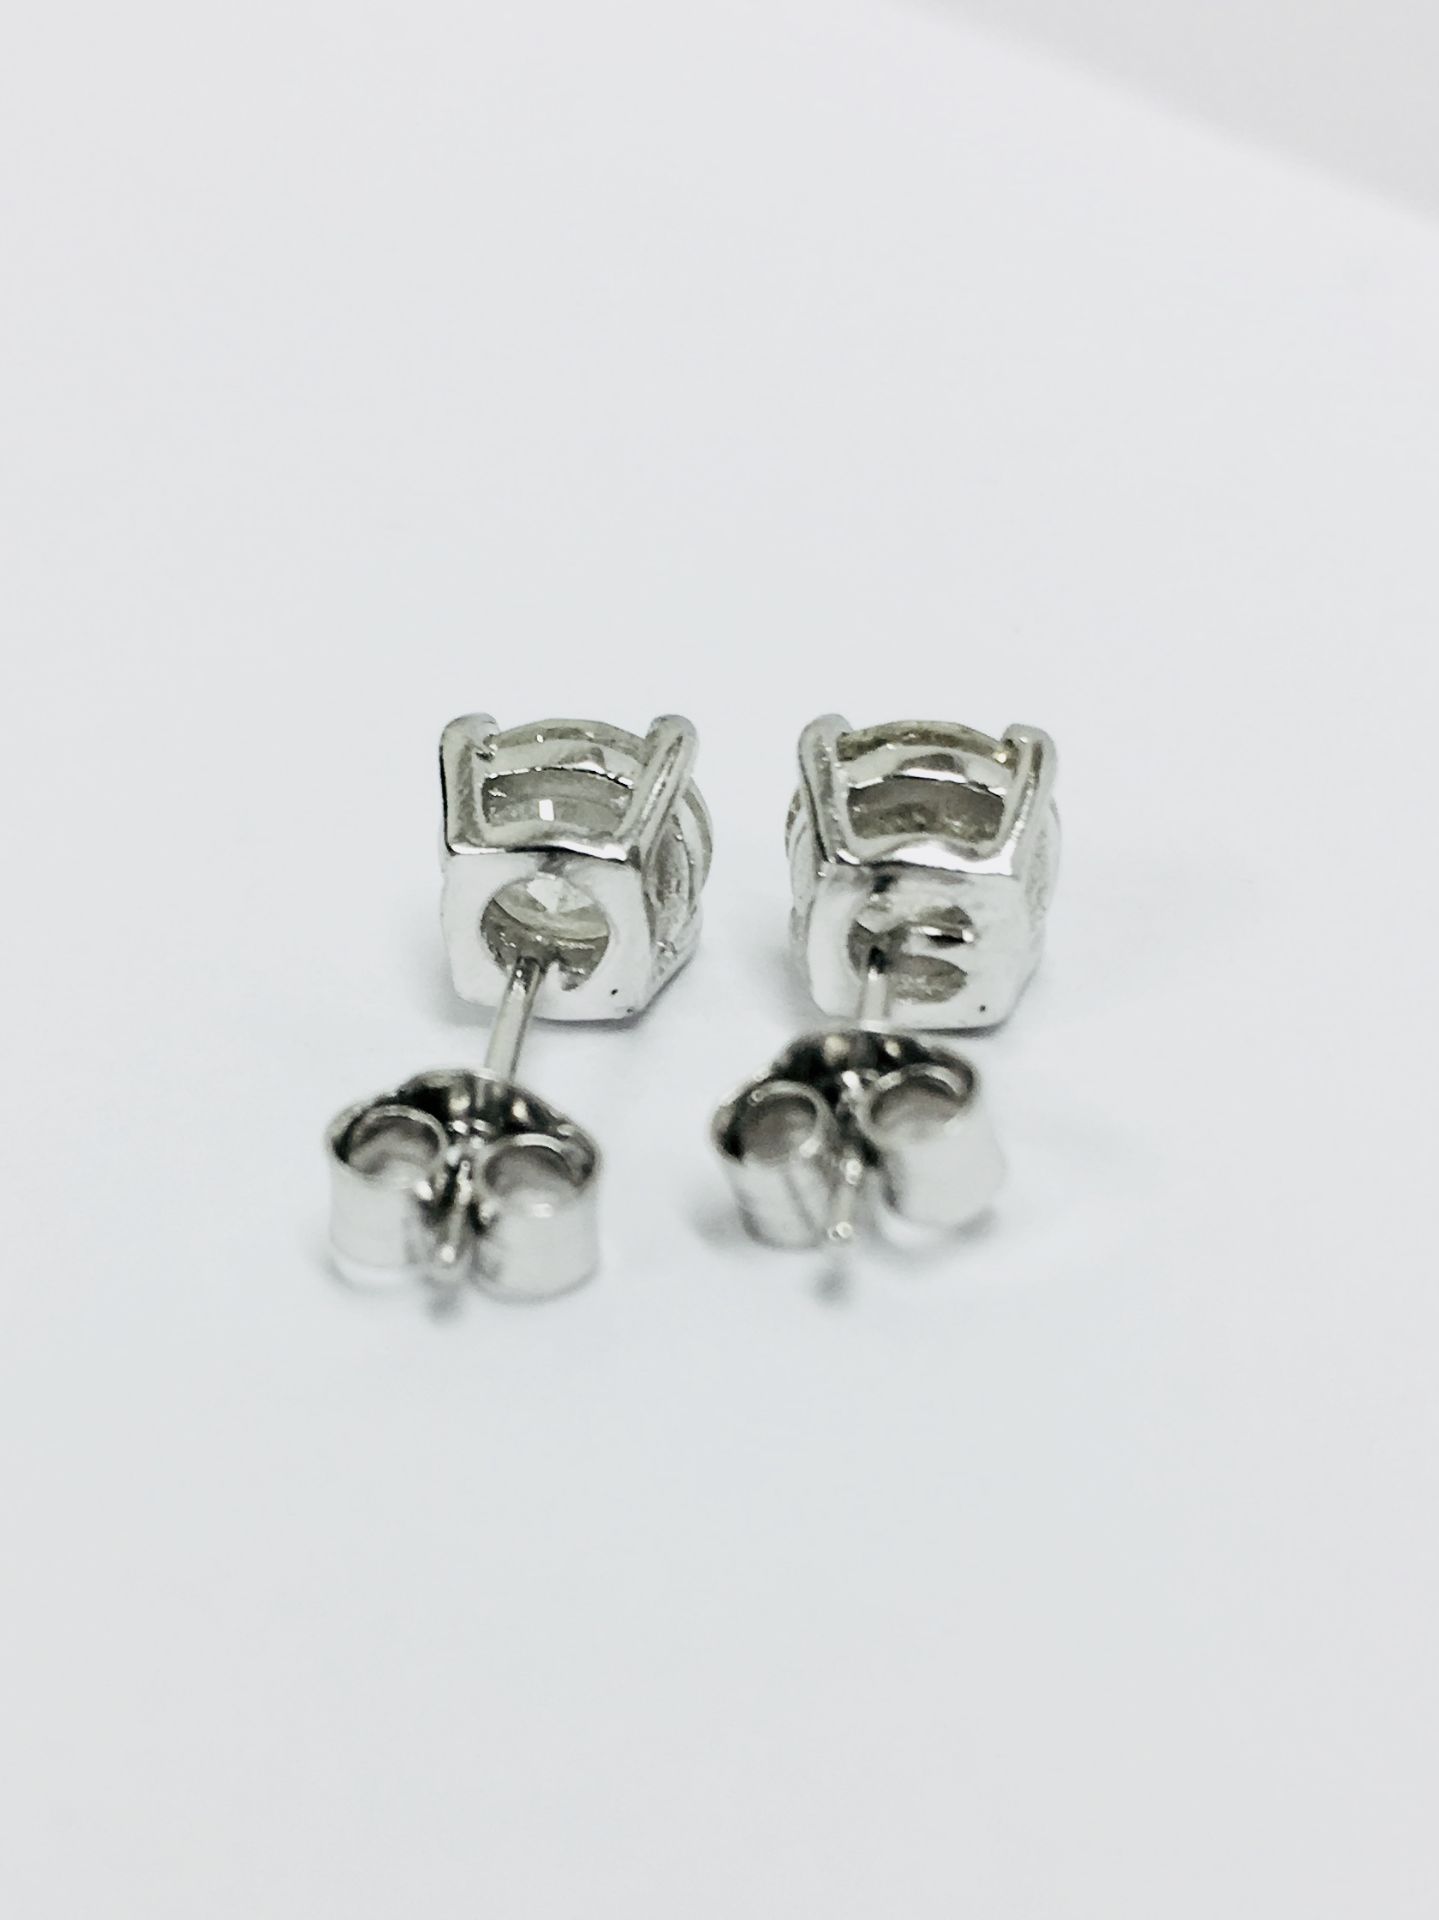 2.00Ct Solitaire Diamond Stud Earrings Set With Brilliant Cut Diamonds Which Have Been Enhanced. - Image 17 of 19